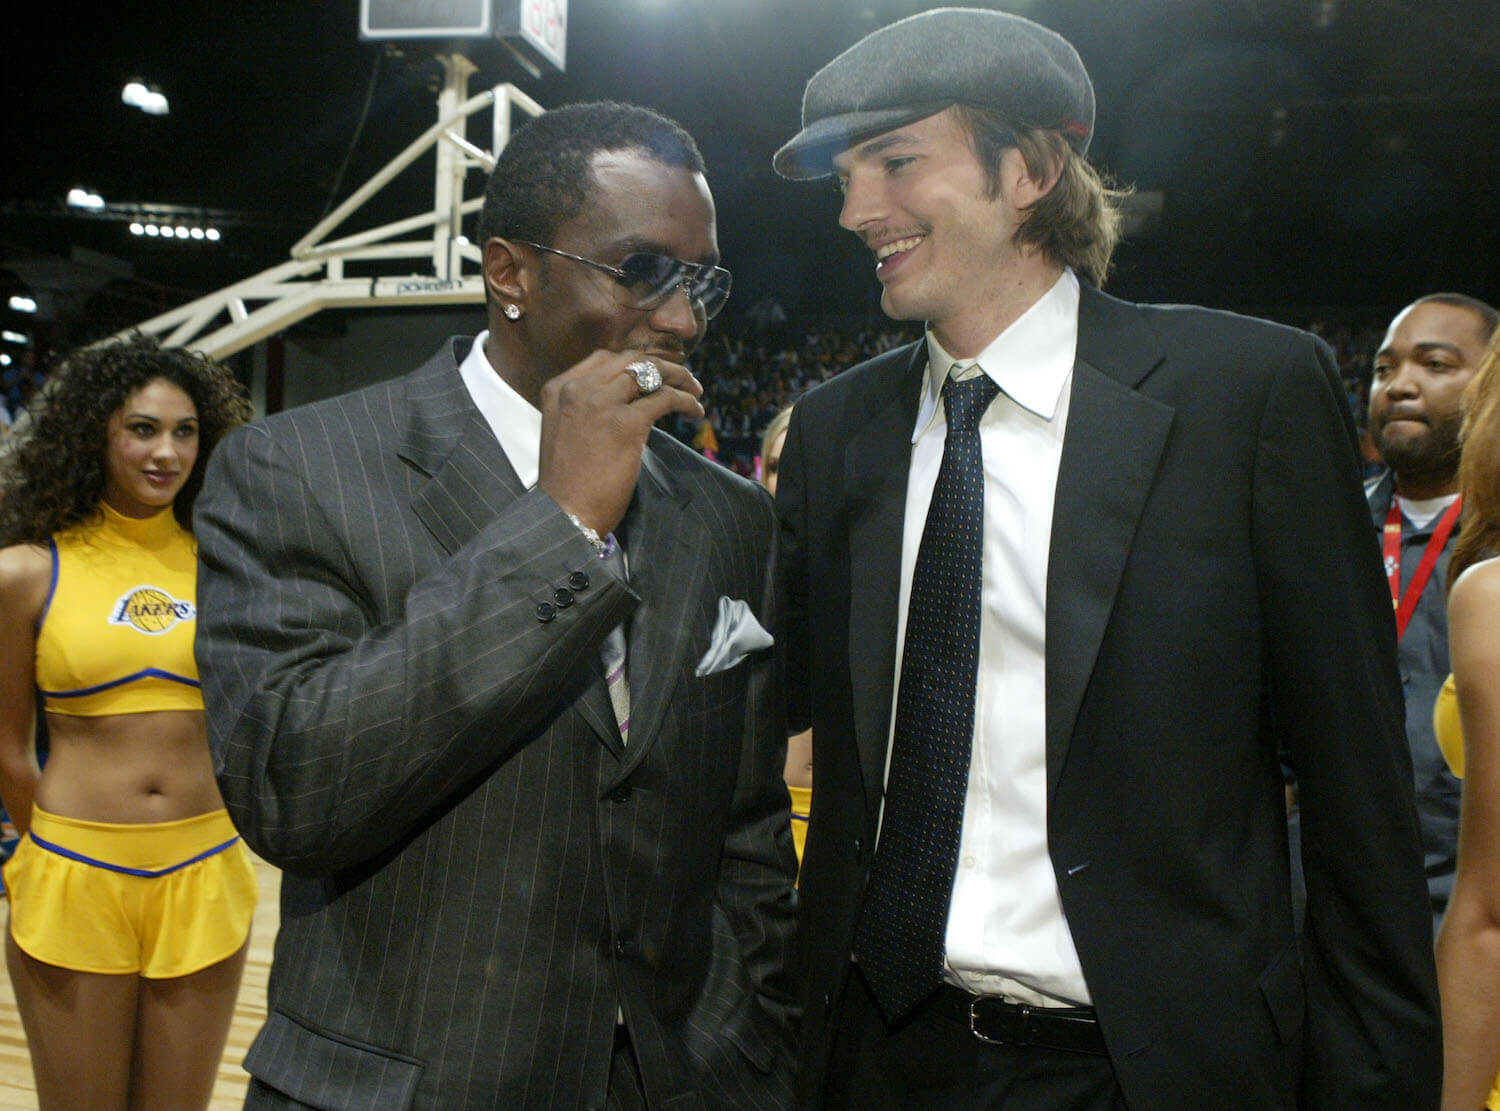 Ashton Kutcher Once Said Sean ‘P. Diddy’ Combs Doesn’t Show ‘Humility’: ‘He Just Can’t Lose’